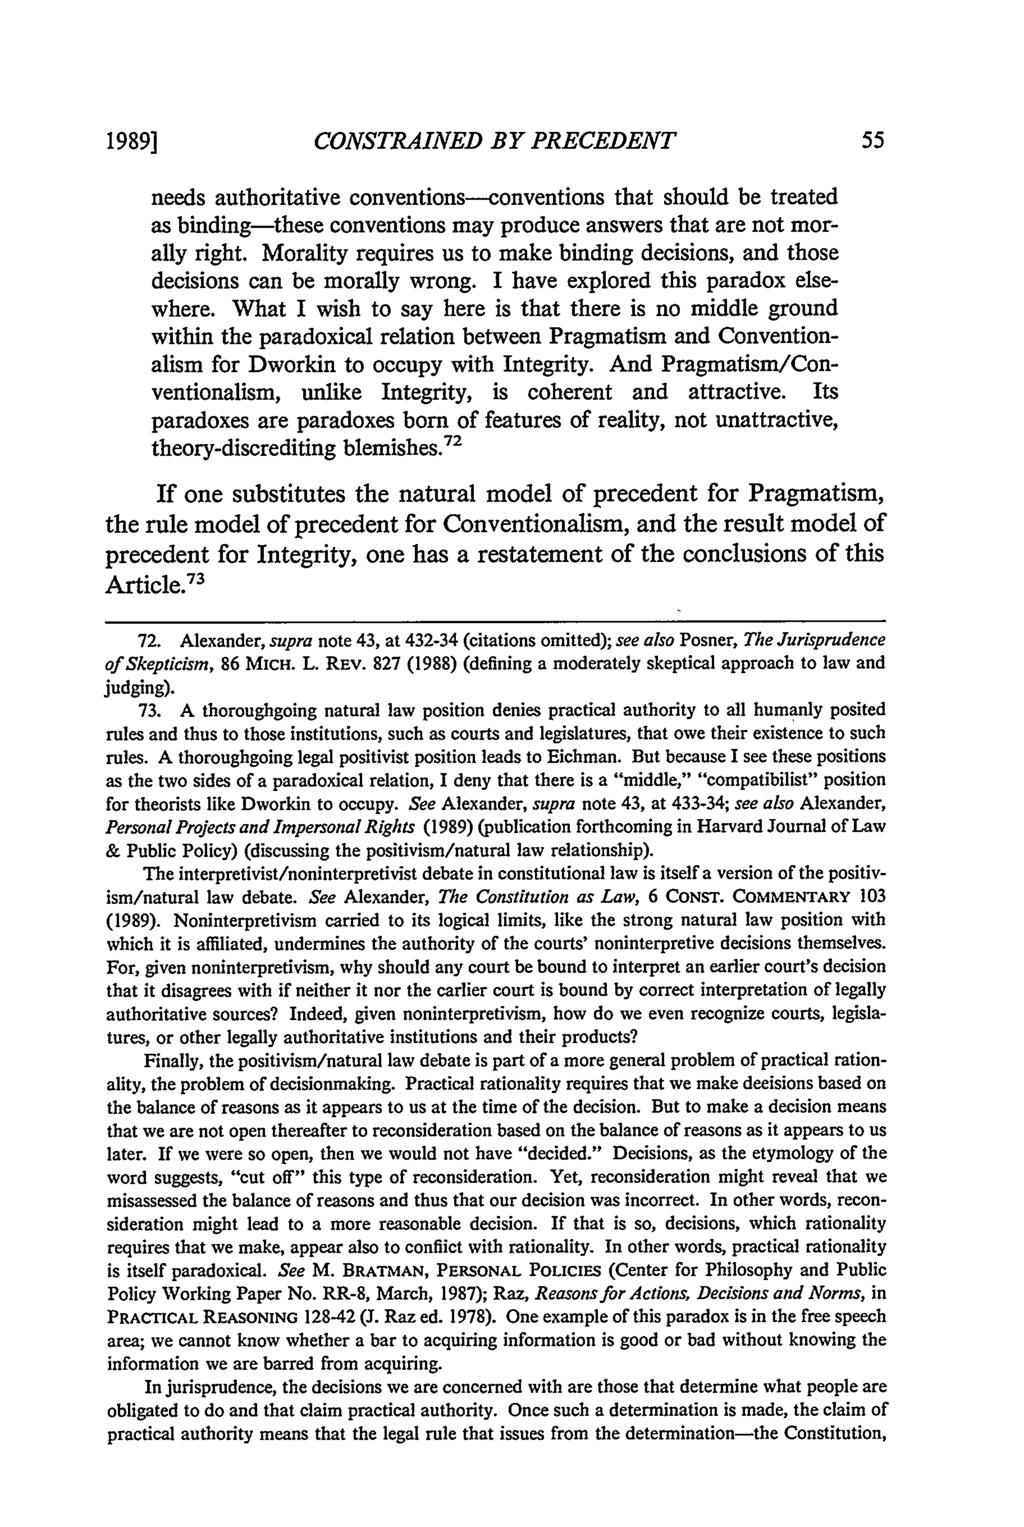 1989] CONSTRAINED BY PRECEDENT needs authoritative conventions--conventions that should be treated as binding-these conventions may produce answers that are not morally right.